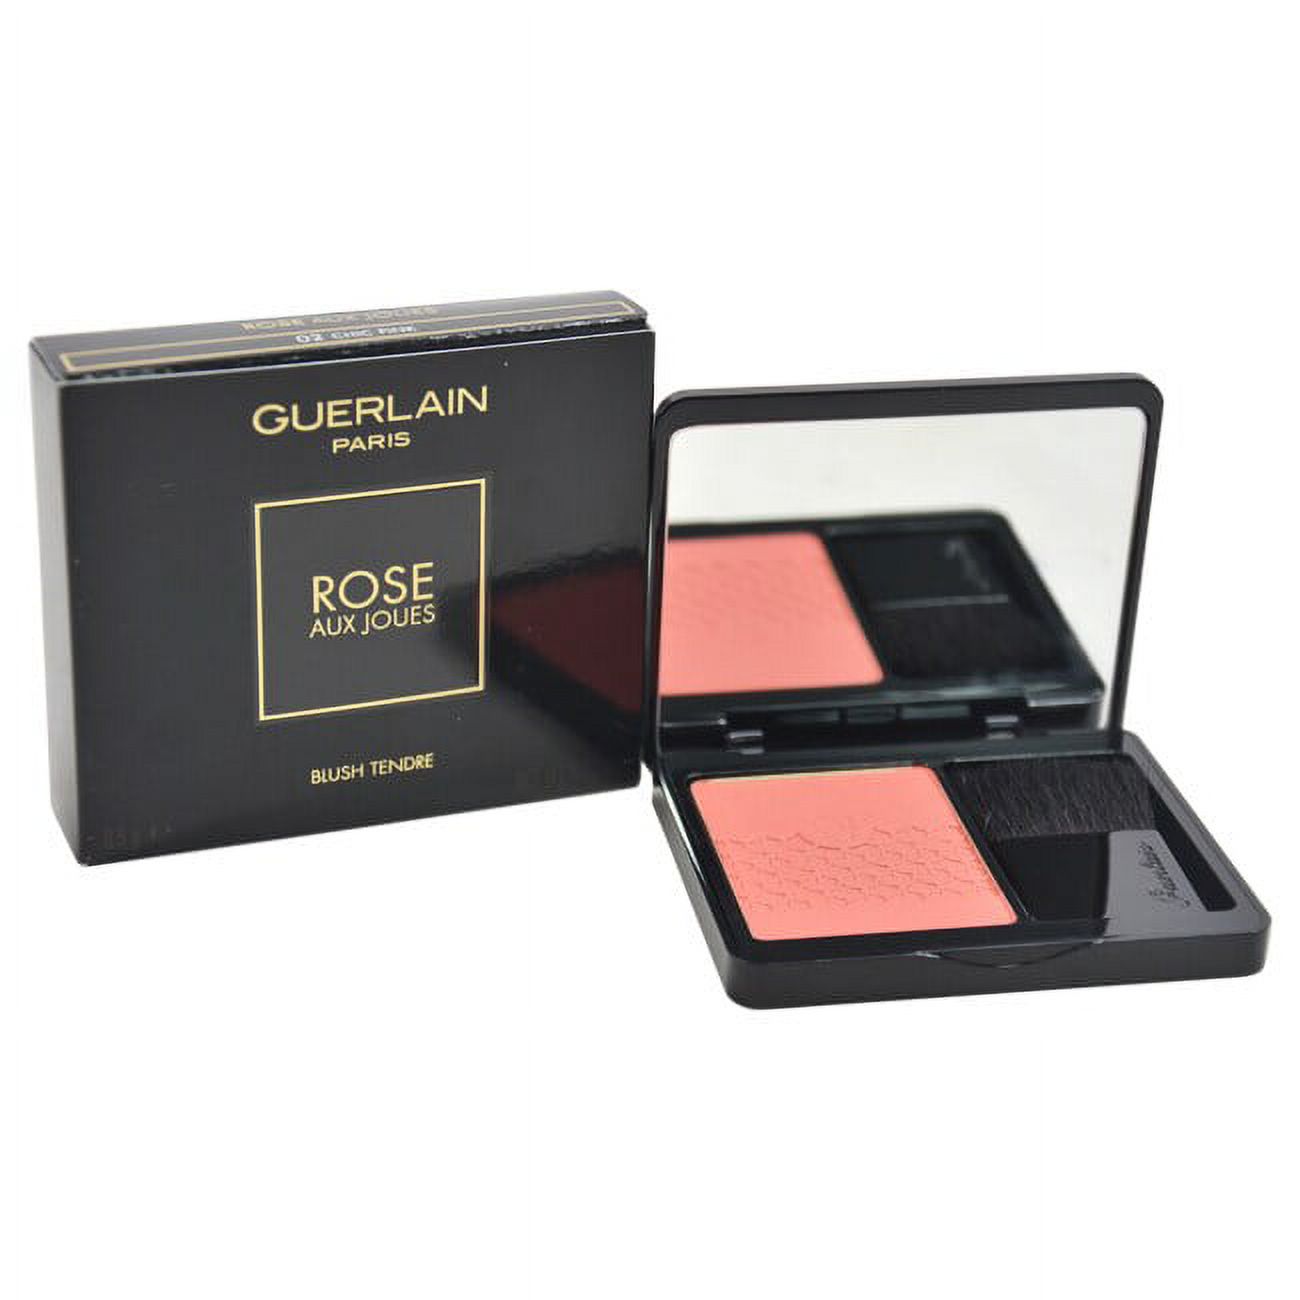 Rose Aux Joues Tender Blush # 02 Chic Pink by Guerlain for Women - 0.22 oz Blush - image 2 of 3